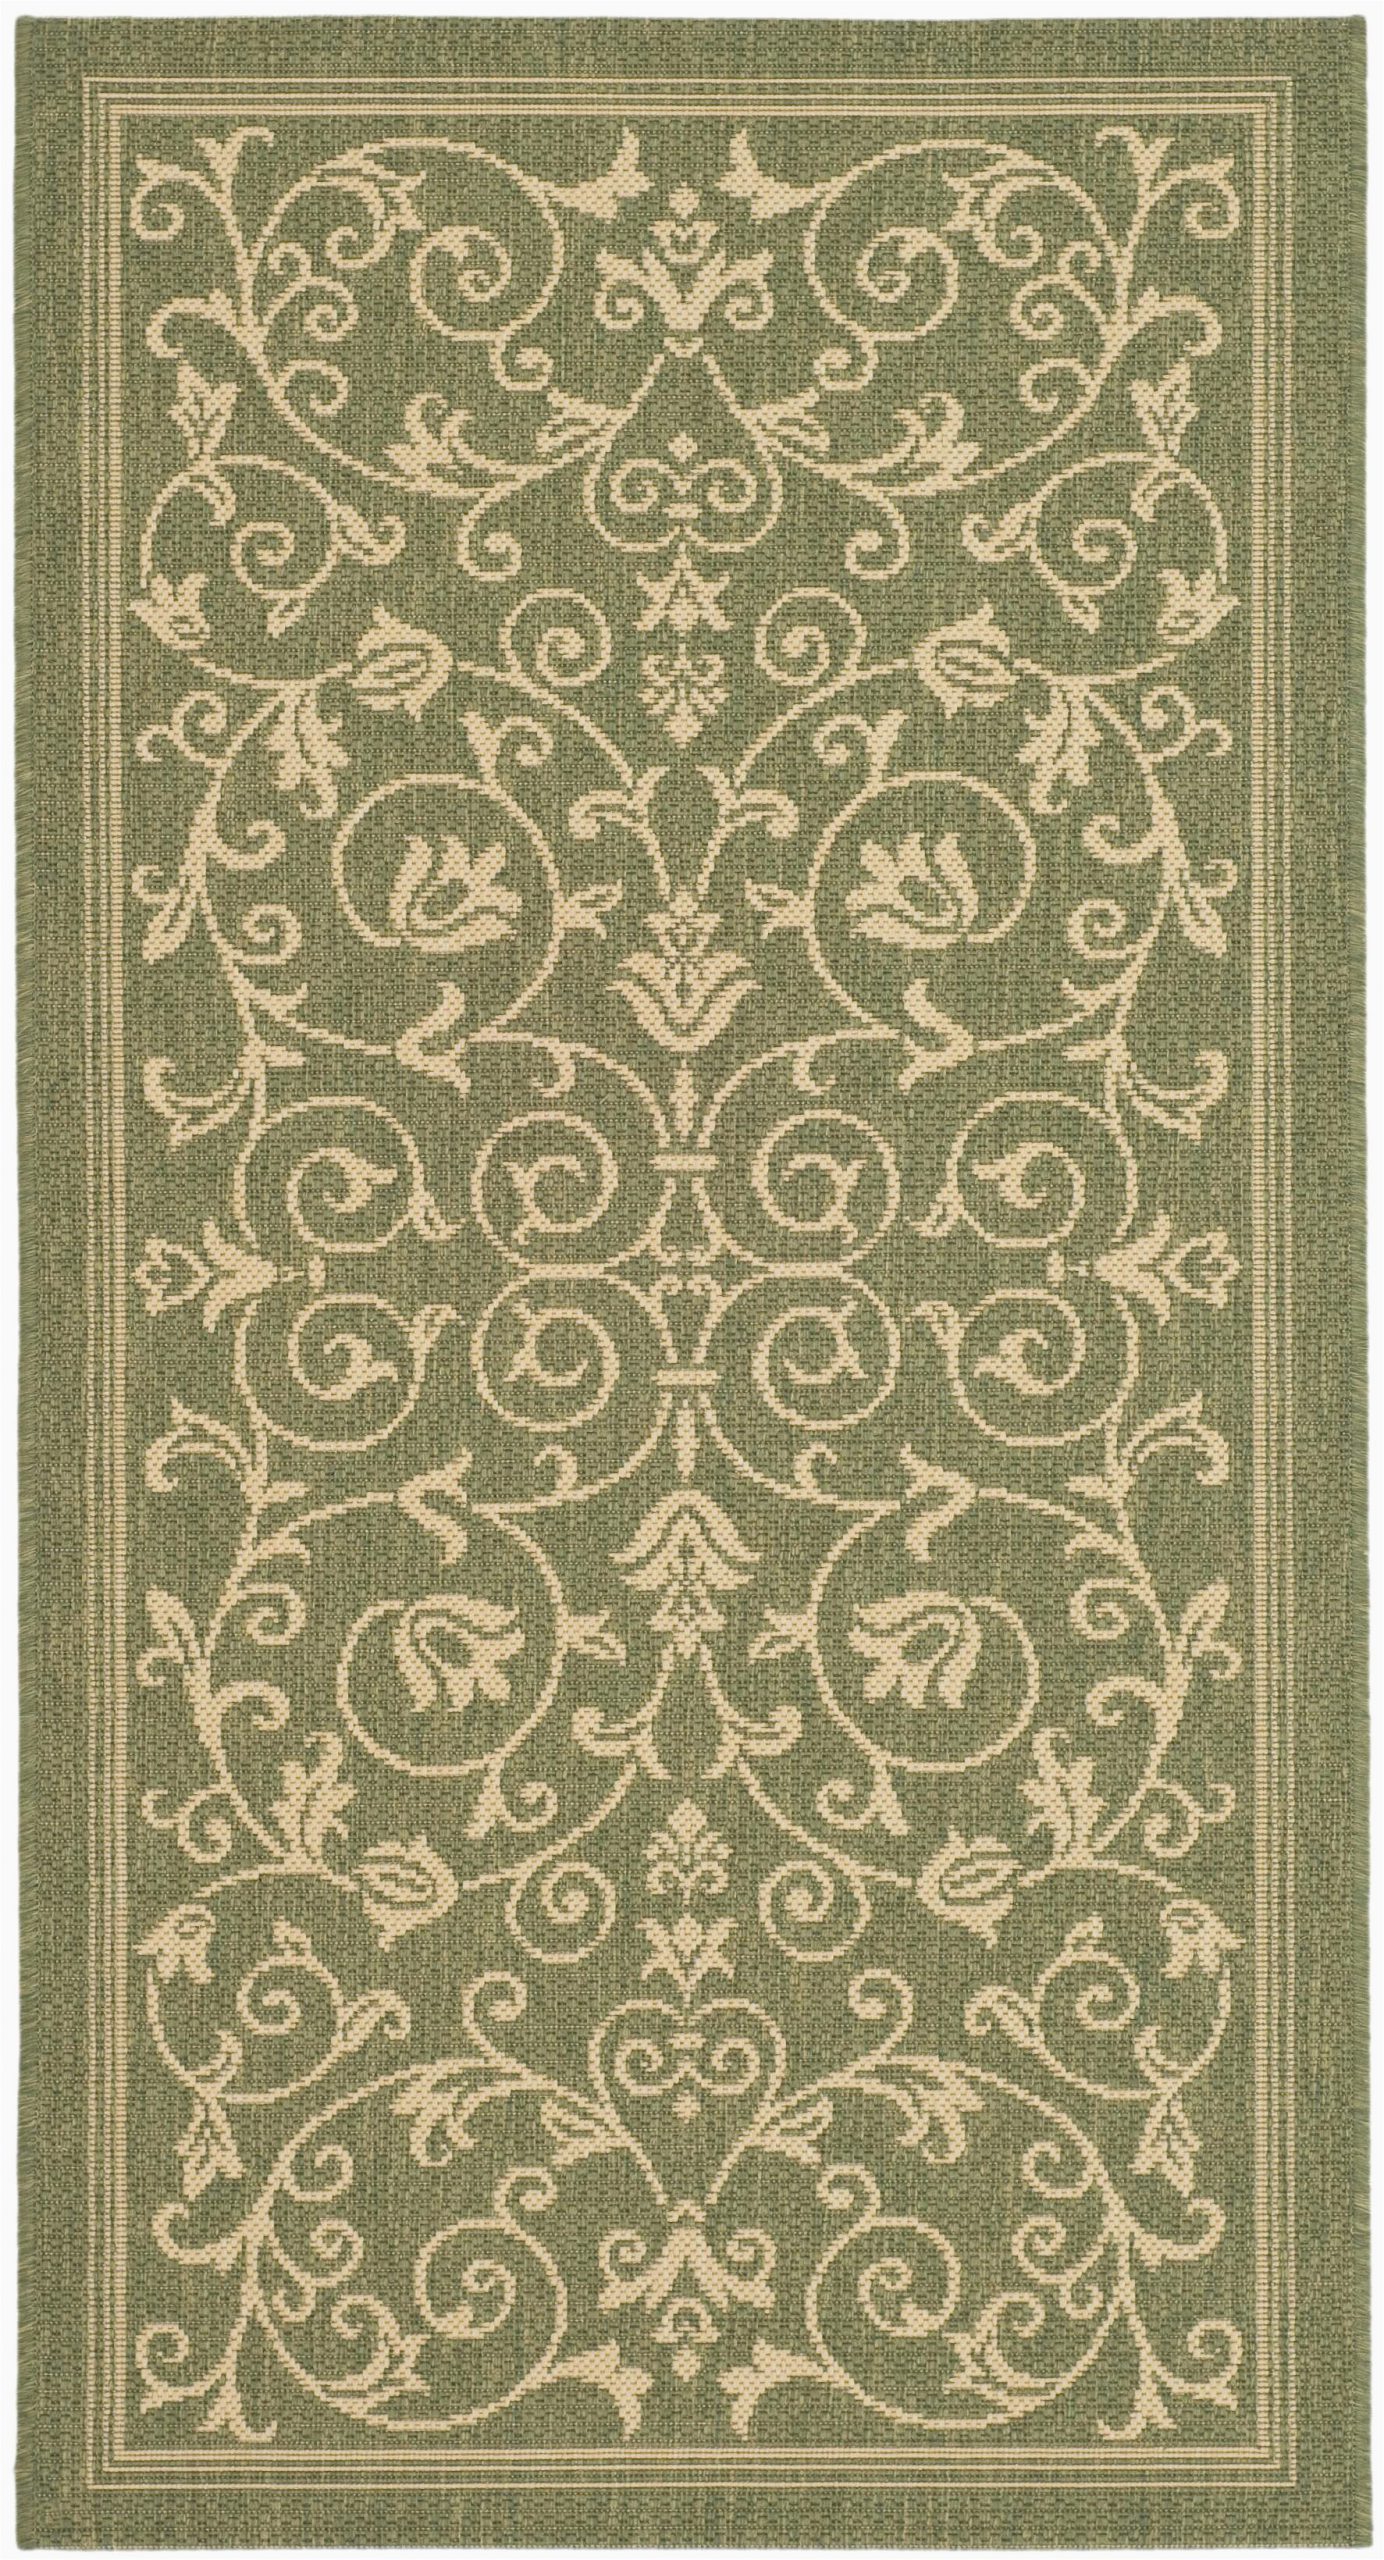 Cheap Indoor Outdoor area Rugs Herefordshire Floral Green Indoor Outdoor area Rug